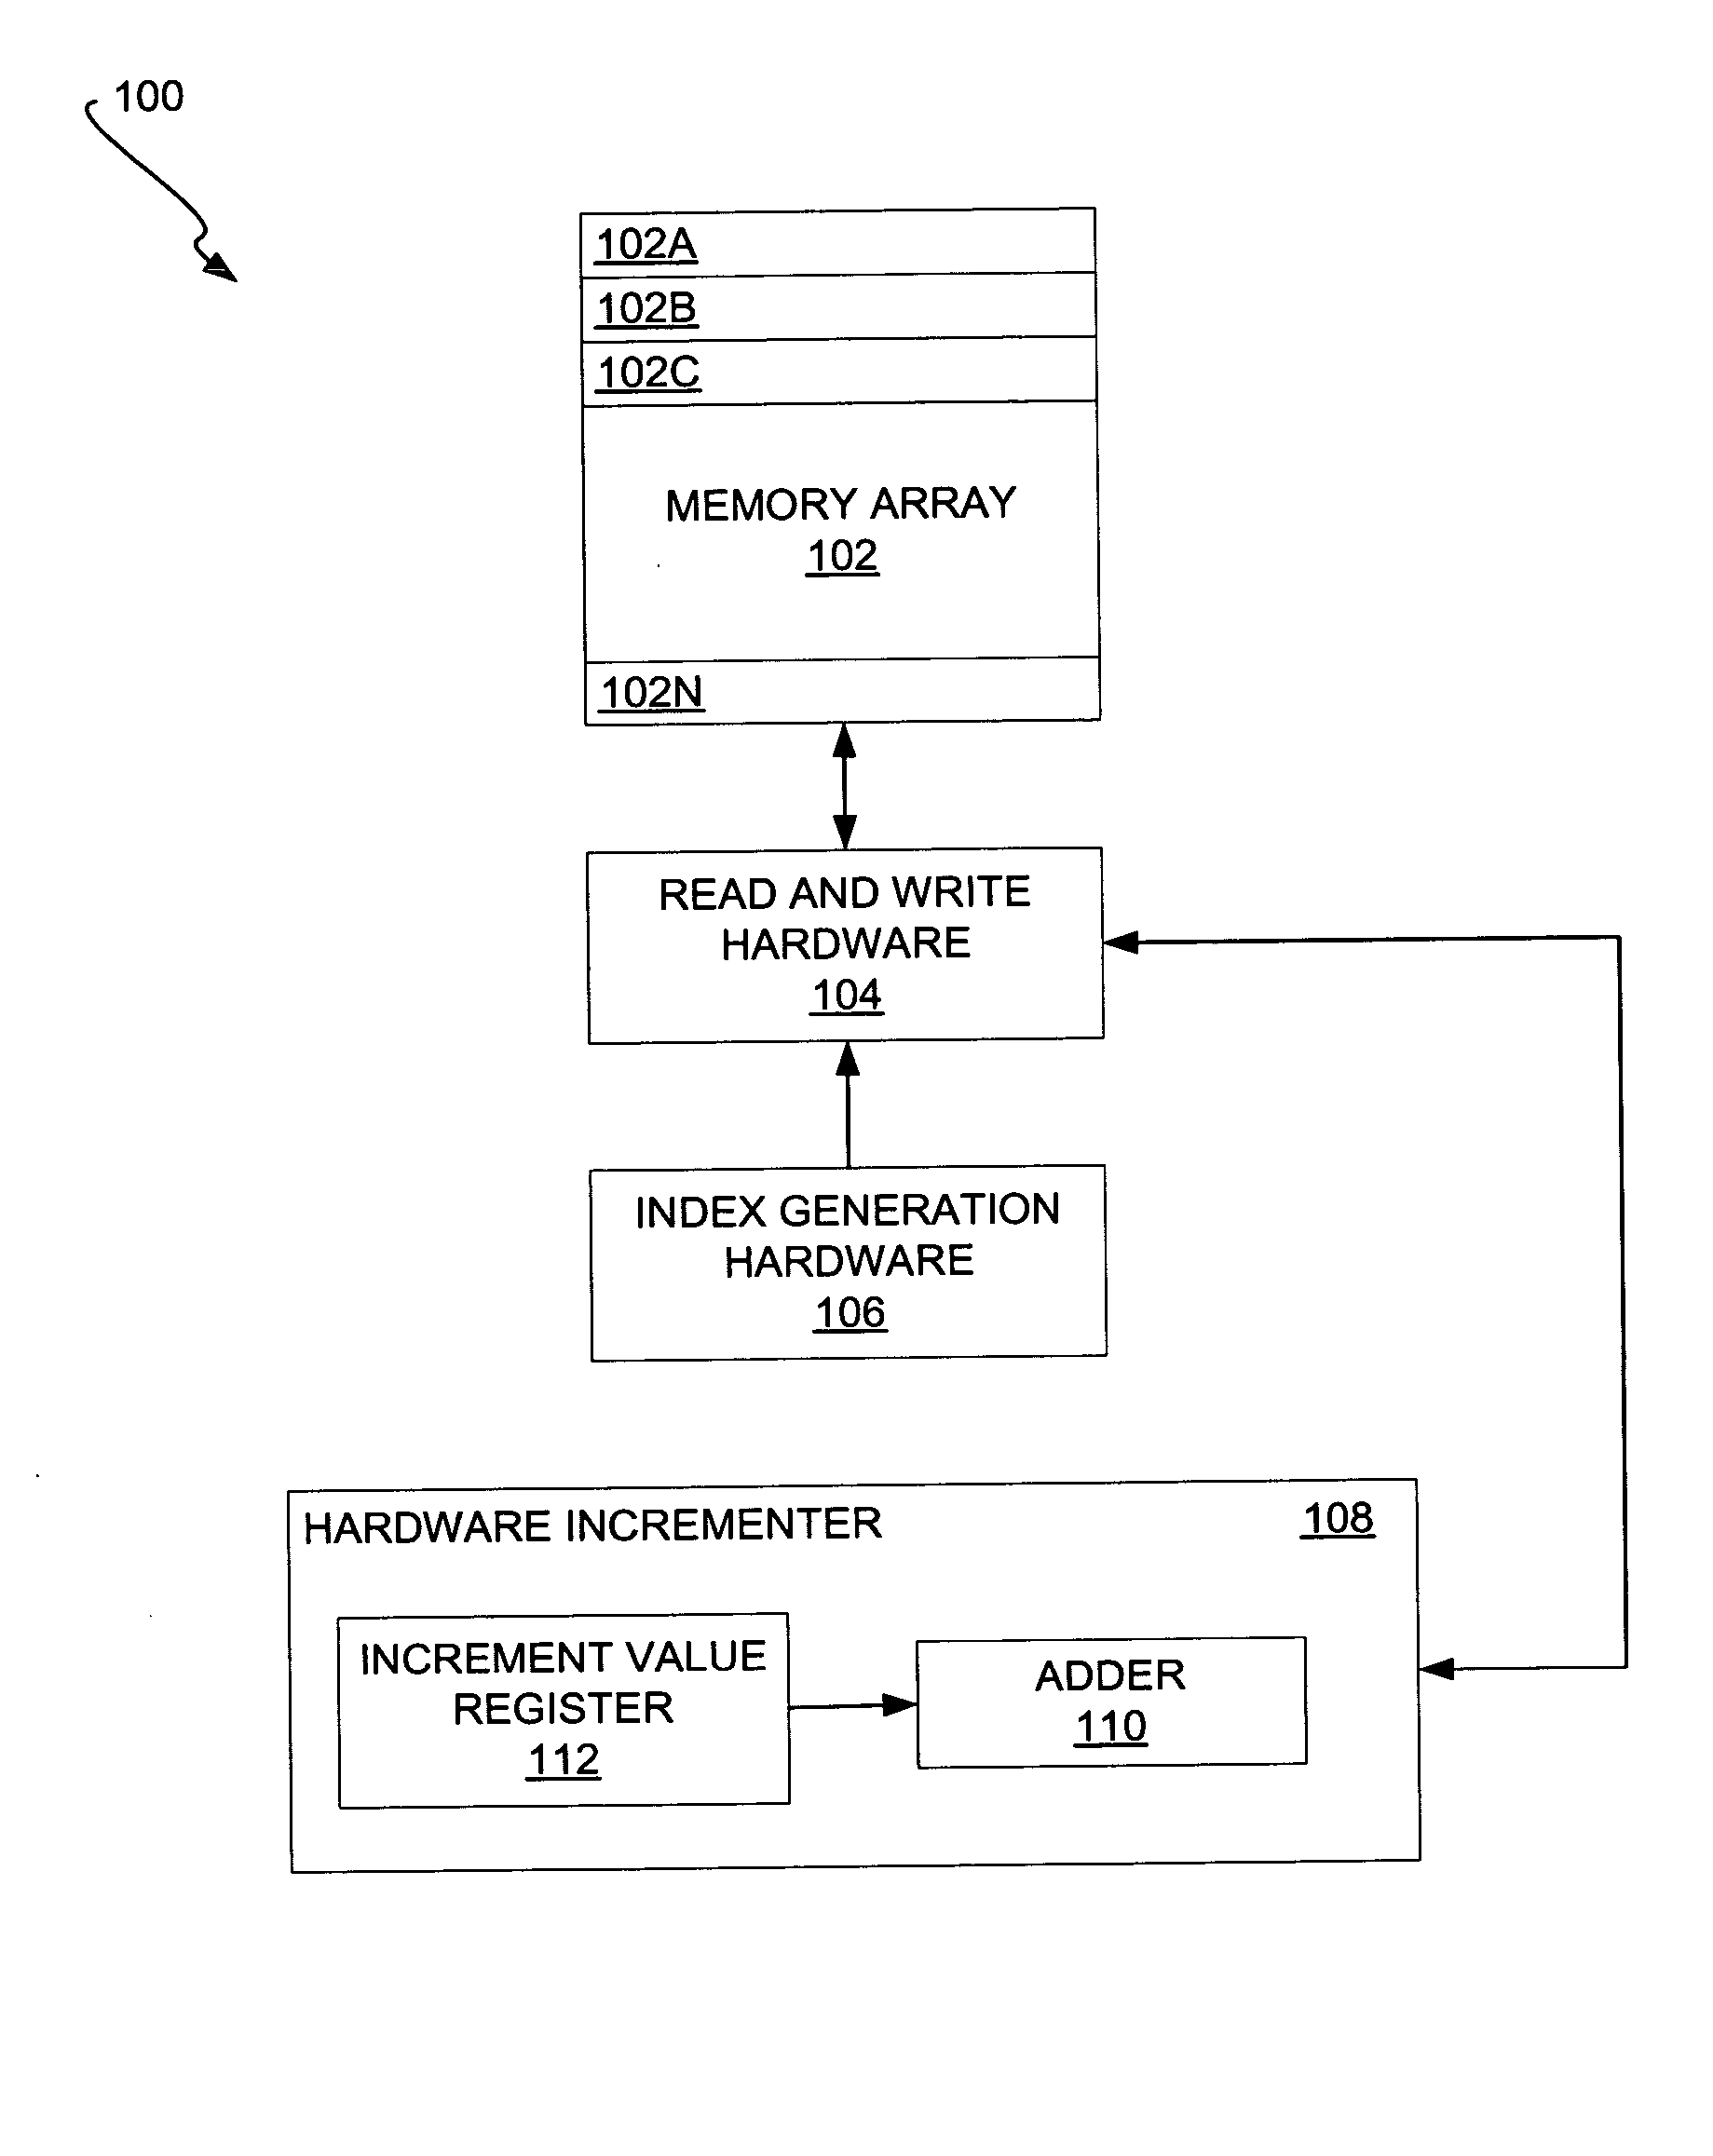 Implementation-efficient multiple-counter value hardware performance counter